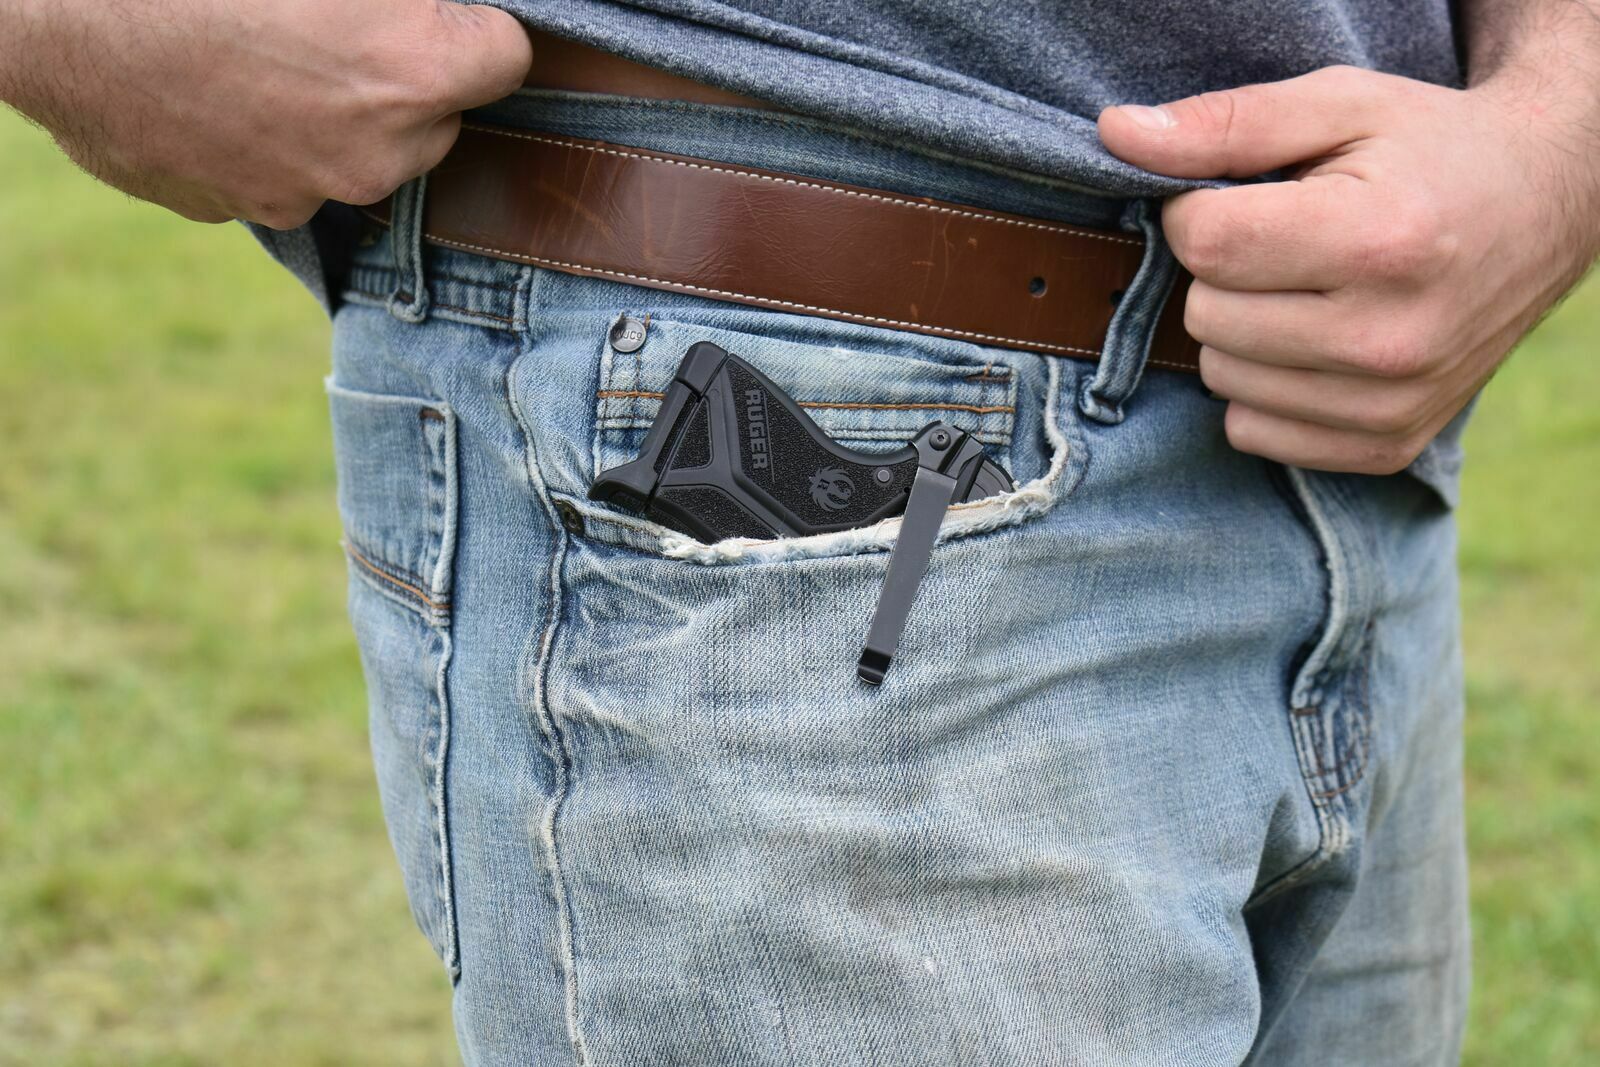 What you need to Know about conceal carry holsters